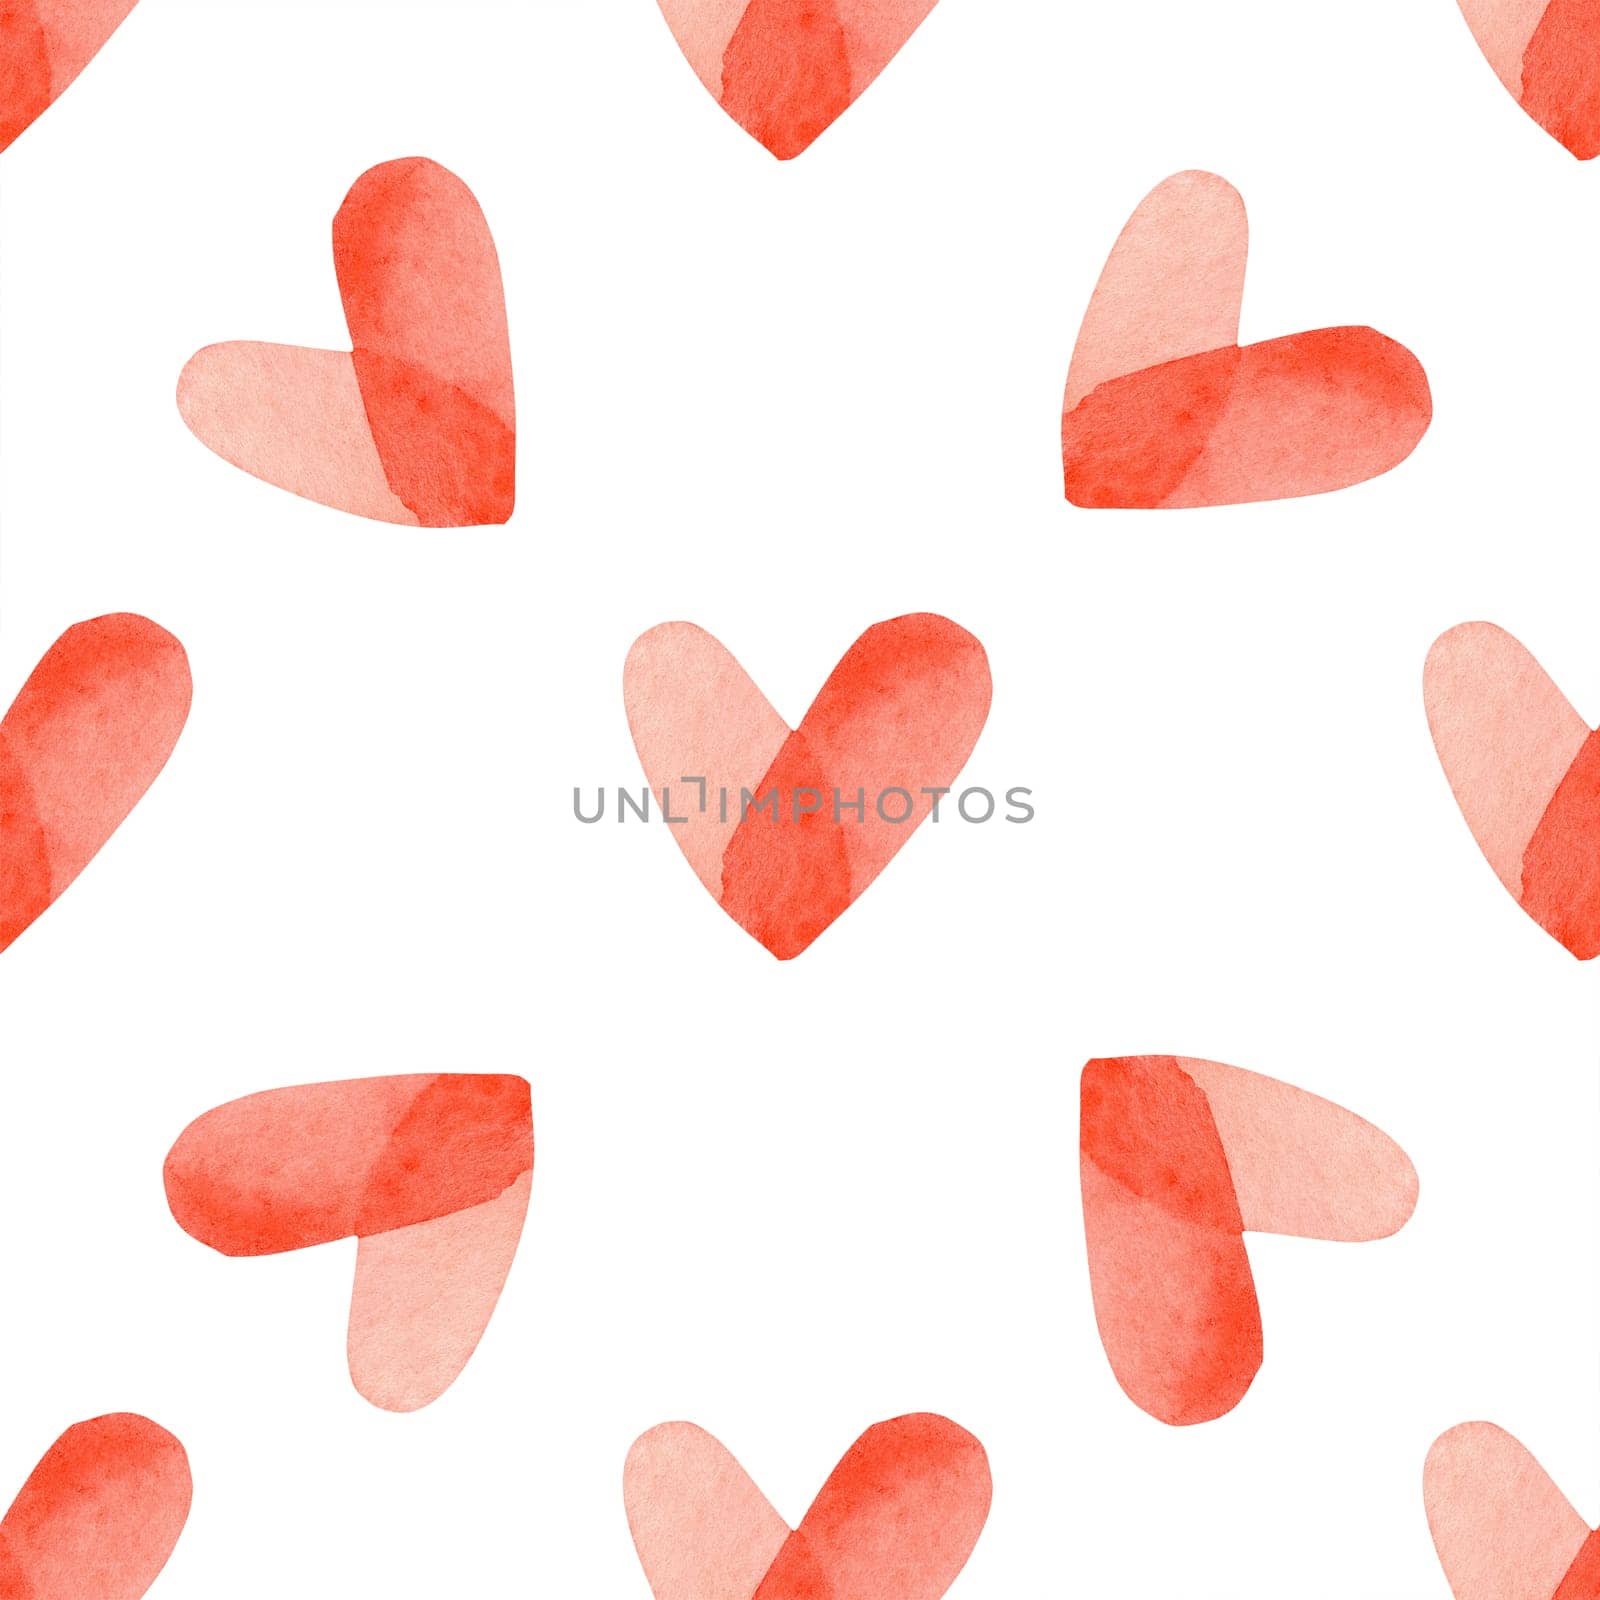 Seamless pattern with red bright hand painted watercolor hearts. Romantic decorative background perfect for Valentine's day gift paper, wedding decor or fabric textile